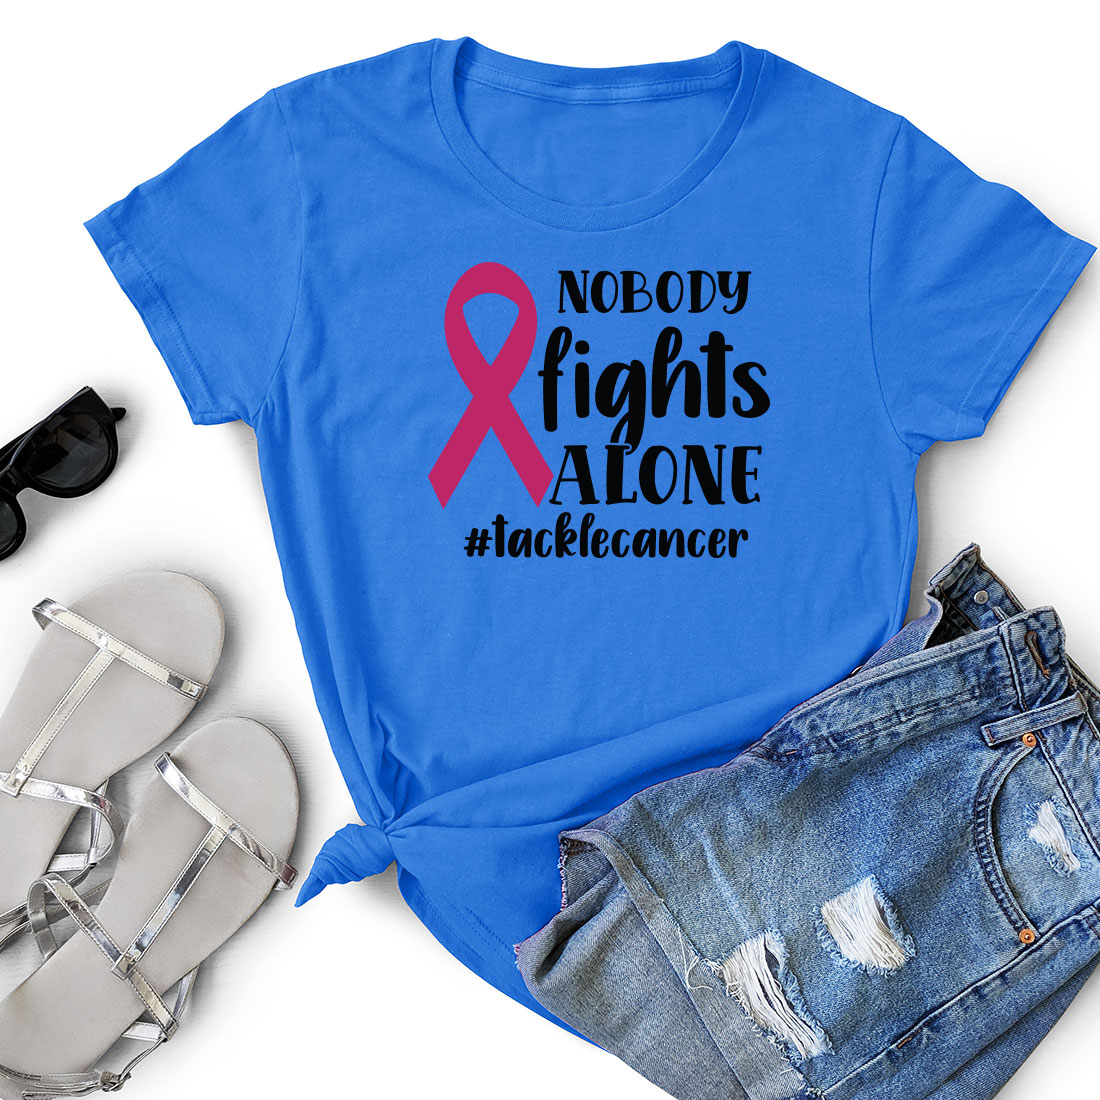 T - shirt that says nobody fights alone with a pink ribbon.